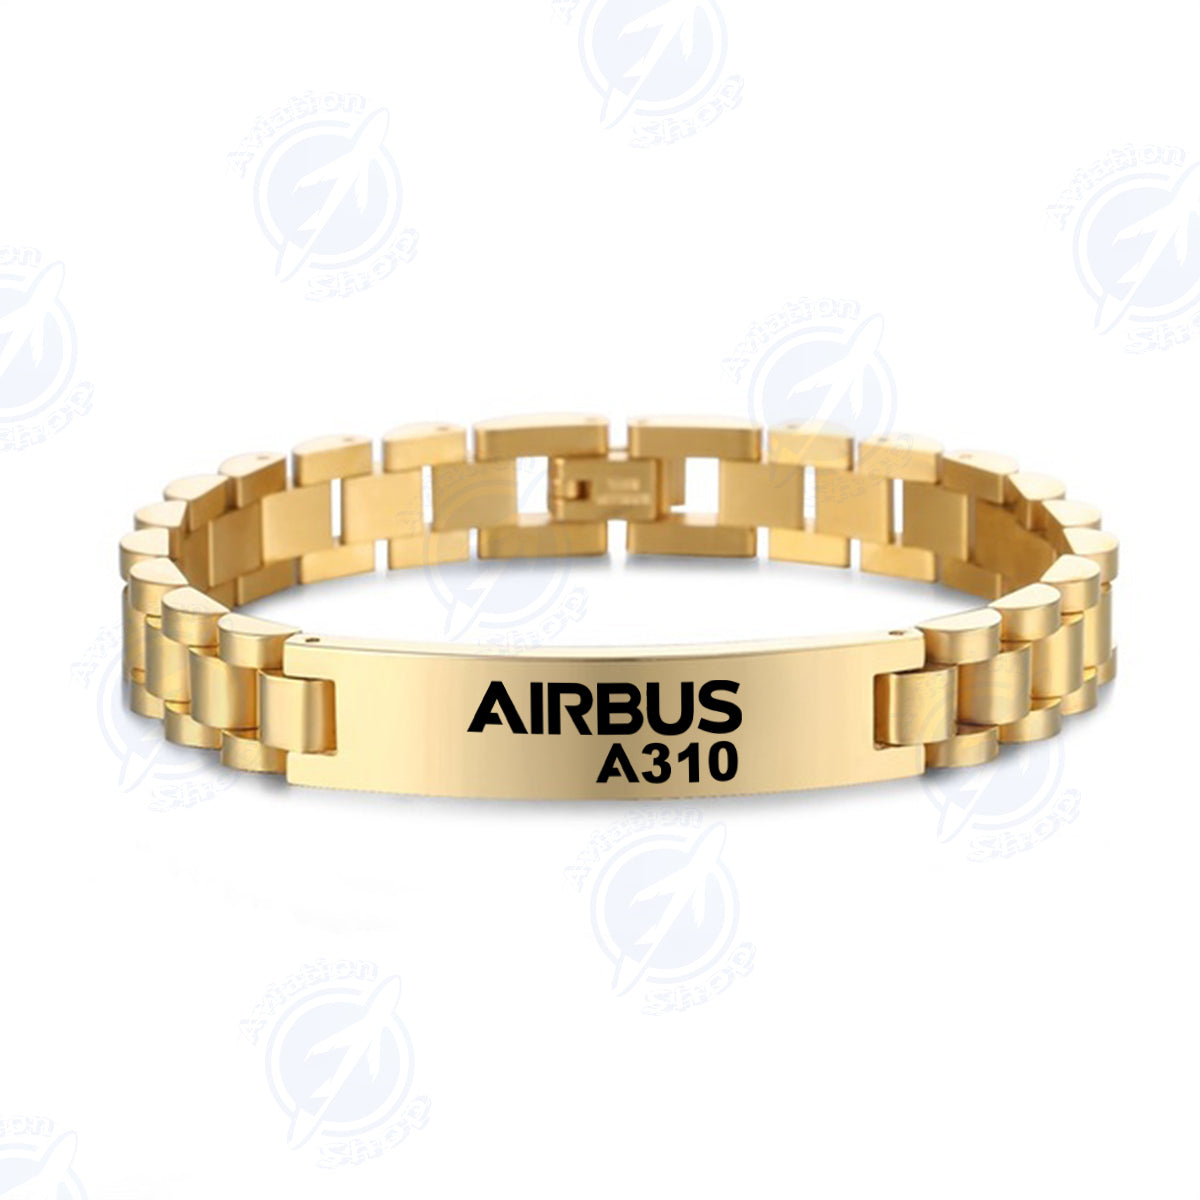 Airbus A310 & Text Designed Stainless Steel Chain Bracelets